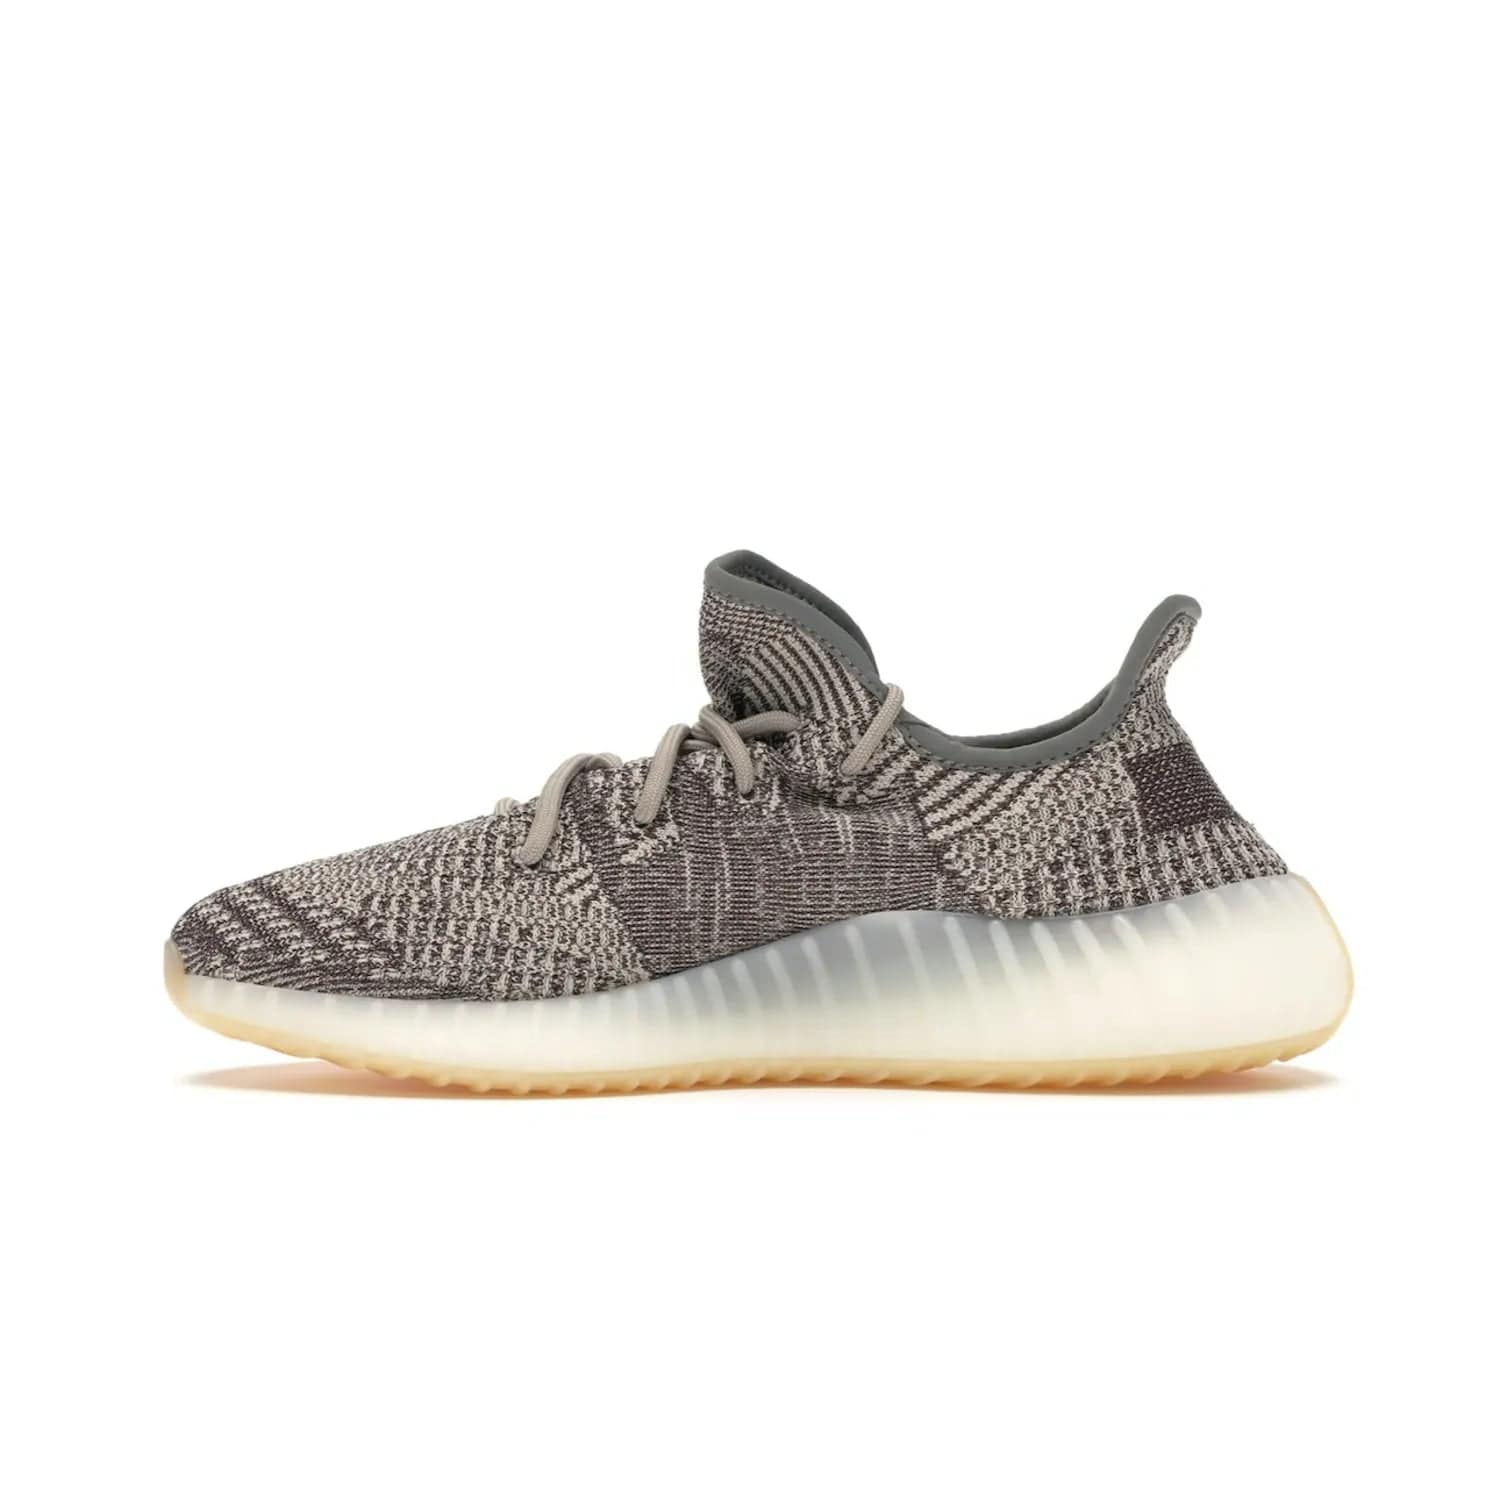 adidas Yeezy Boost 350 V2 Zyon - Image 19 - Only at www.BallersClubKickz.com - Step up your style game with the adidas Yeezy Boost 350 V2 Zyon. This sleek sneaker features a Primeknit upper, dark side stripe, translucent Boost sole, and creamy white interior providing style and comfort. Get them now!